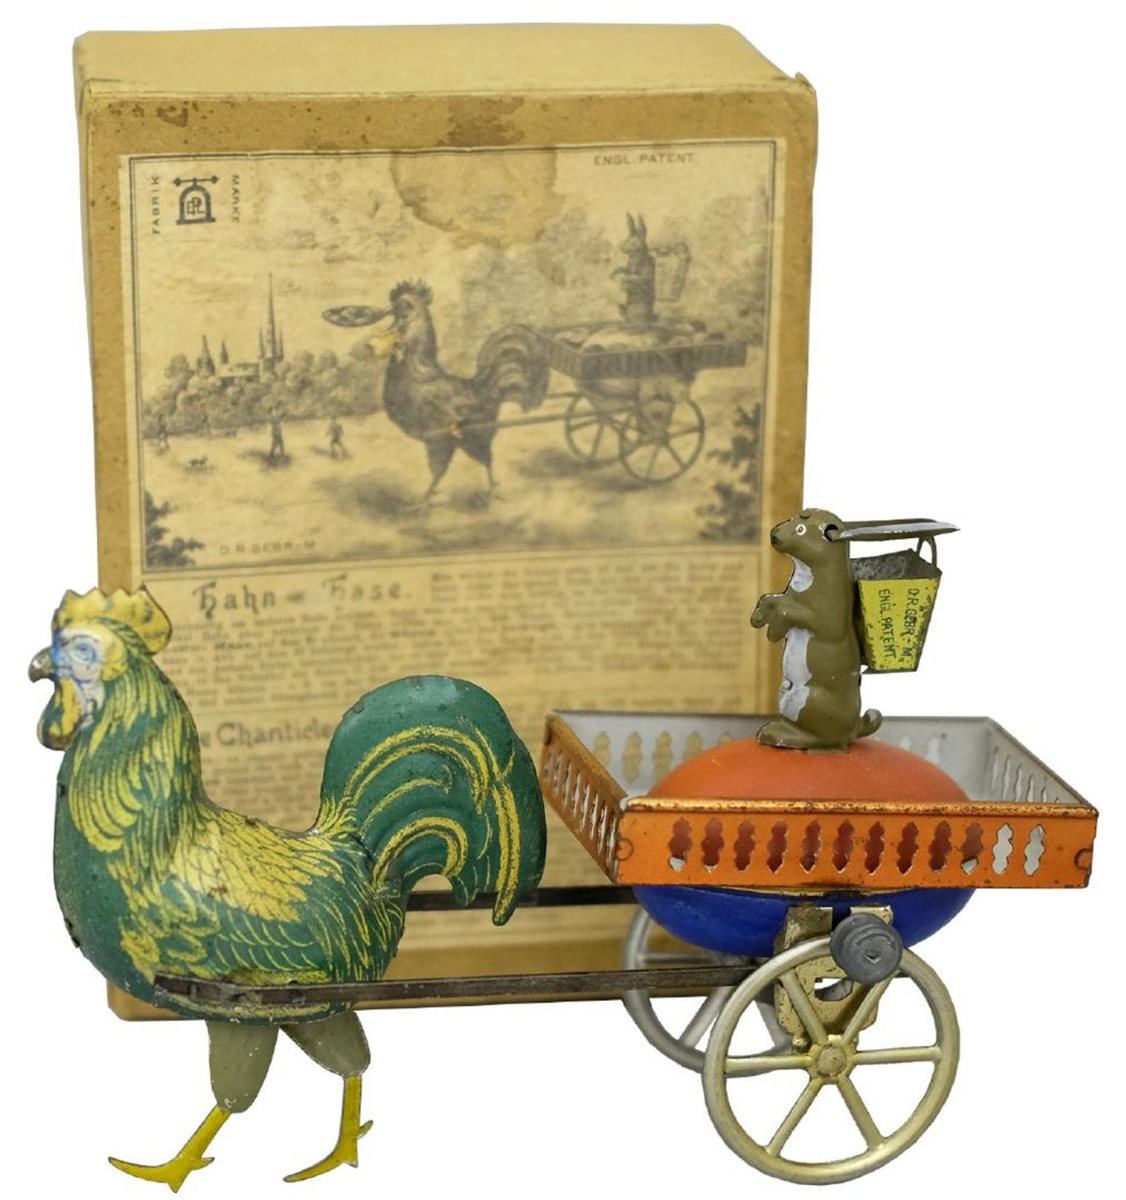 The Rooster and Rabbit (ETL No. 370), a toy that is far more rare than the Duo, Lehmann’s later version of the rooster and rabbit theme. This toy is in near mint condition, retains the original box and sold for $11,400, well over the $3,500 high estimate. The catalog further notes that “To the best of our knowledge, there is no other example of this box at this time.”